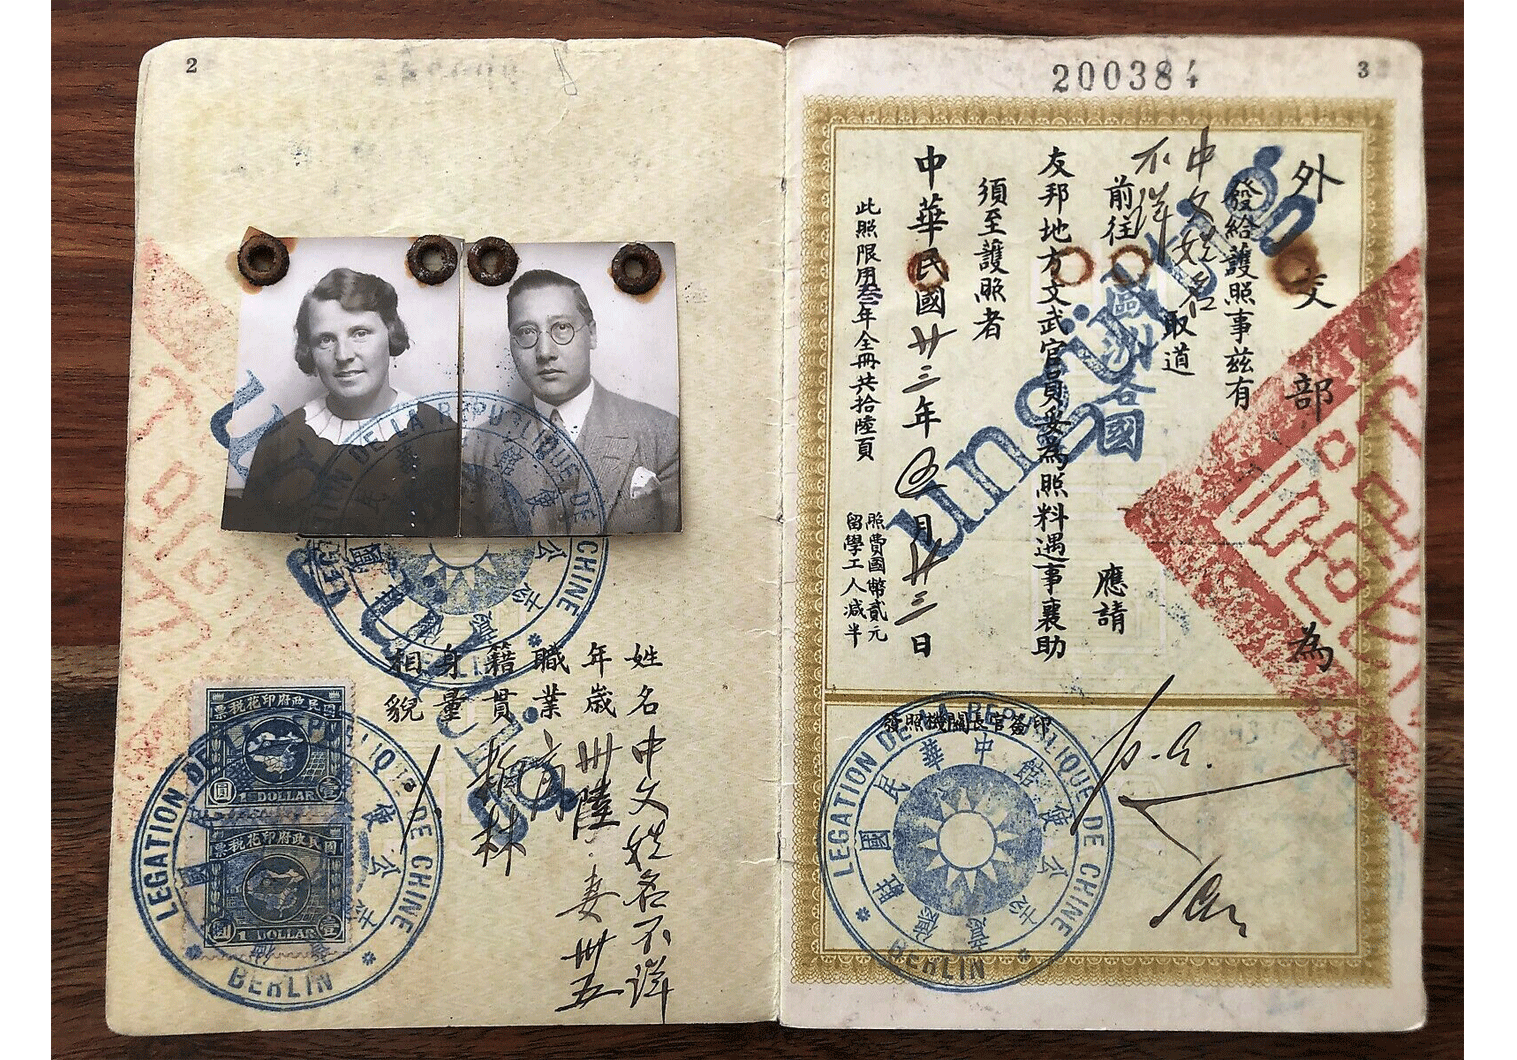 Chinese passport issued in Nazi Germany